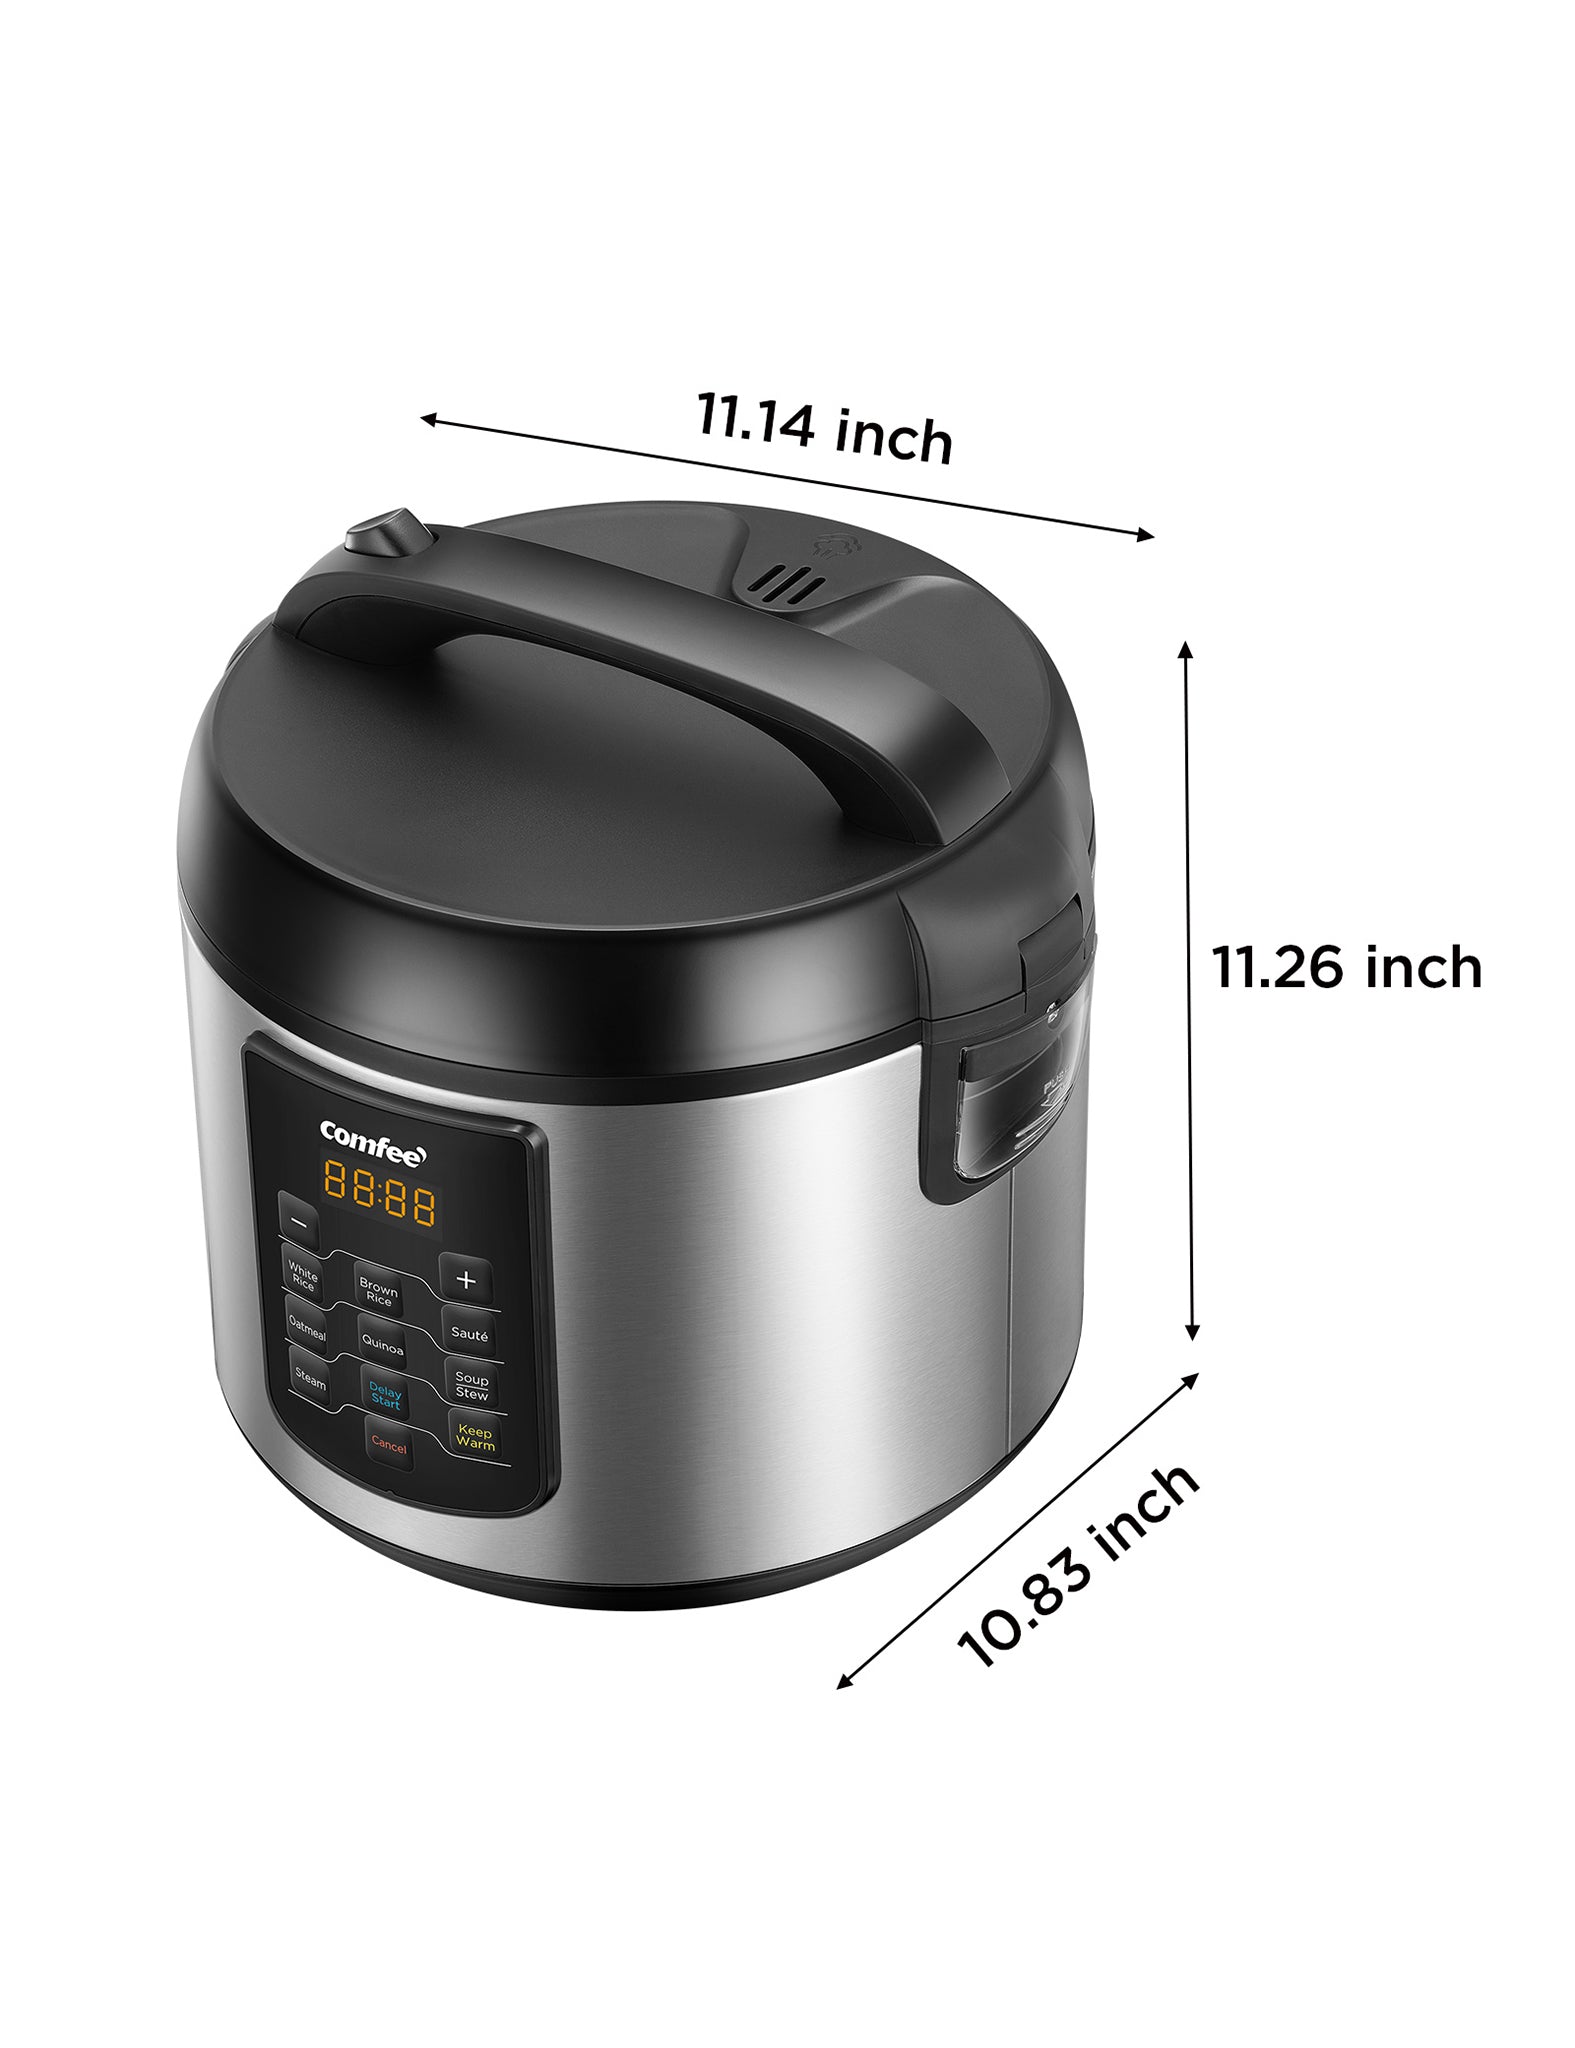 measurements of the comfee stainless steel rice cooker